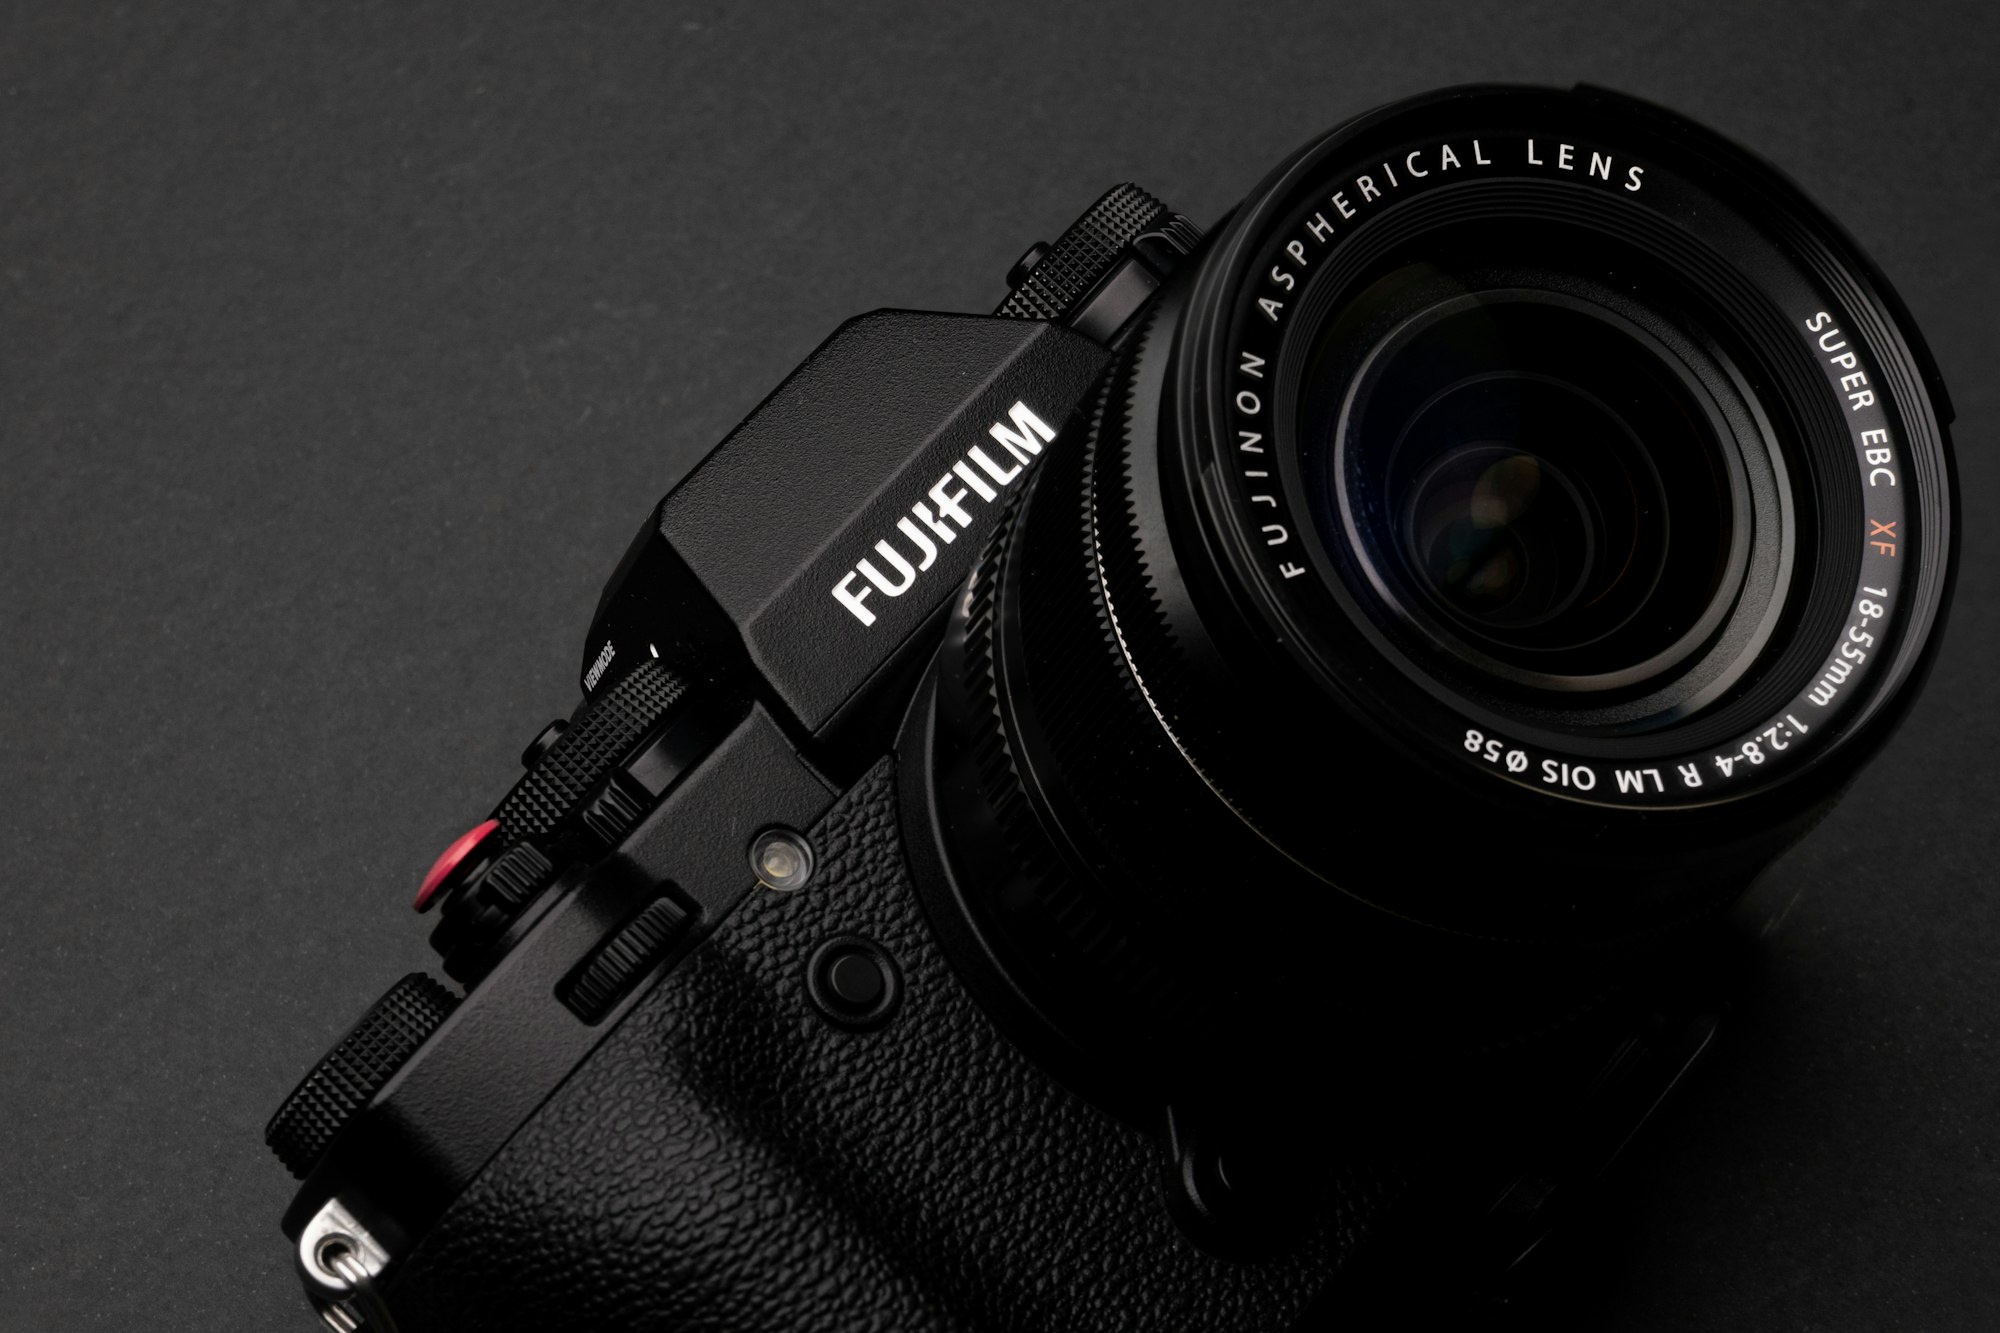 Detail front shot of a Fujifilm X-T3 mirrorless camera with kit lens